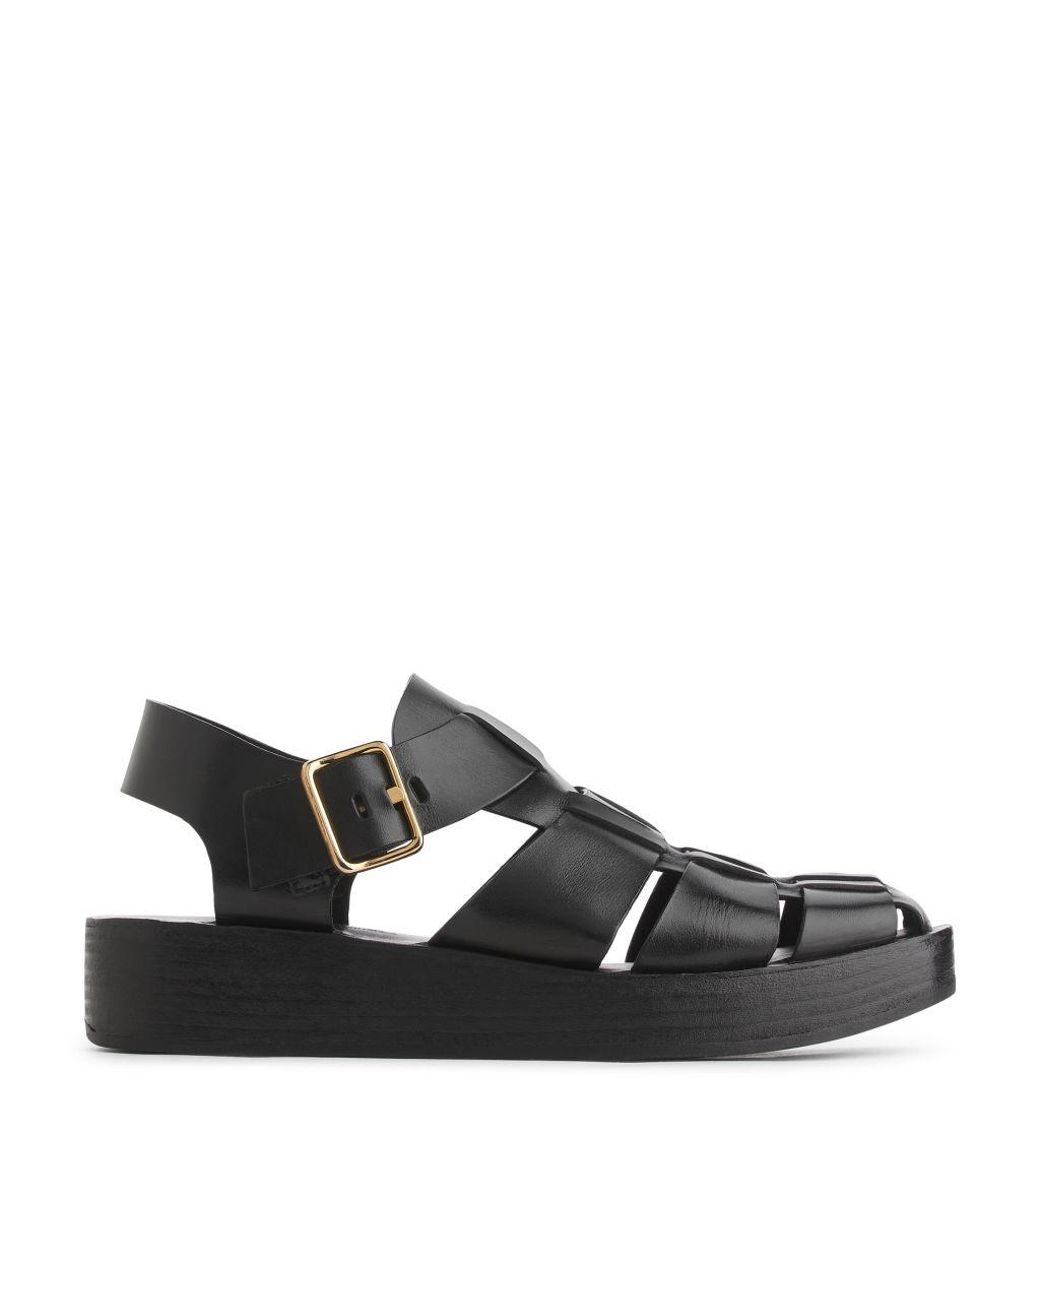 ARKET Cage Leather Sandals in Black | Lyst UK